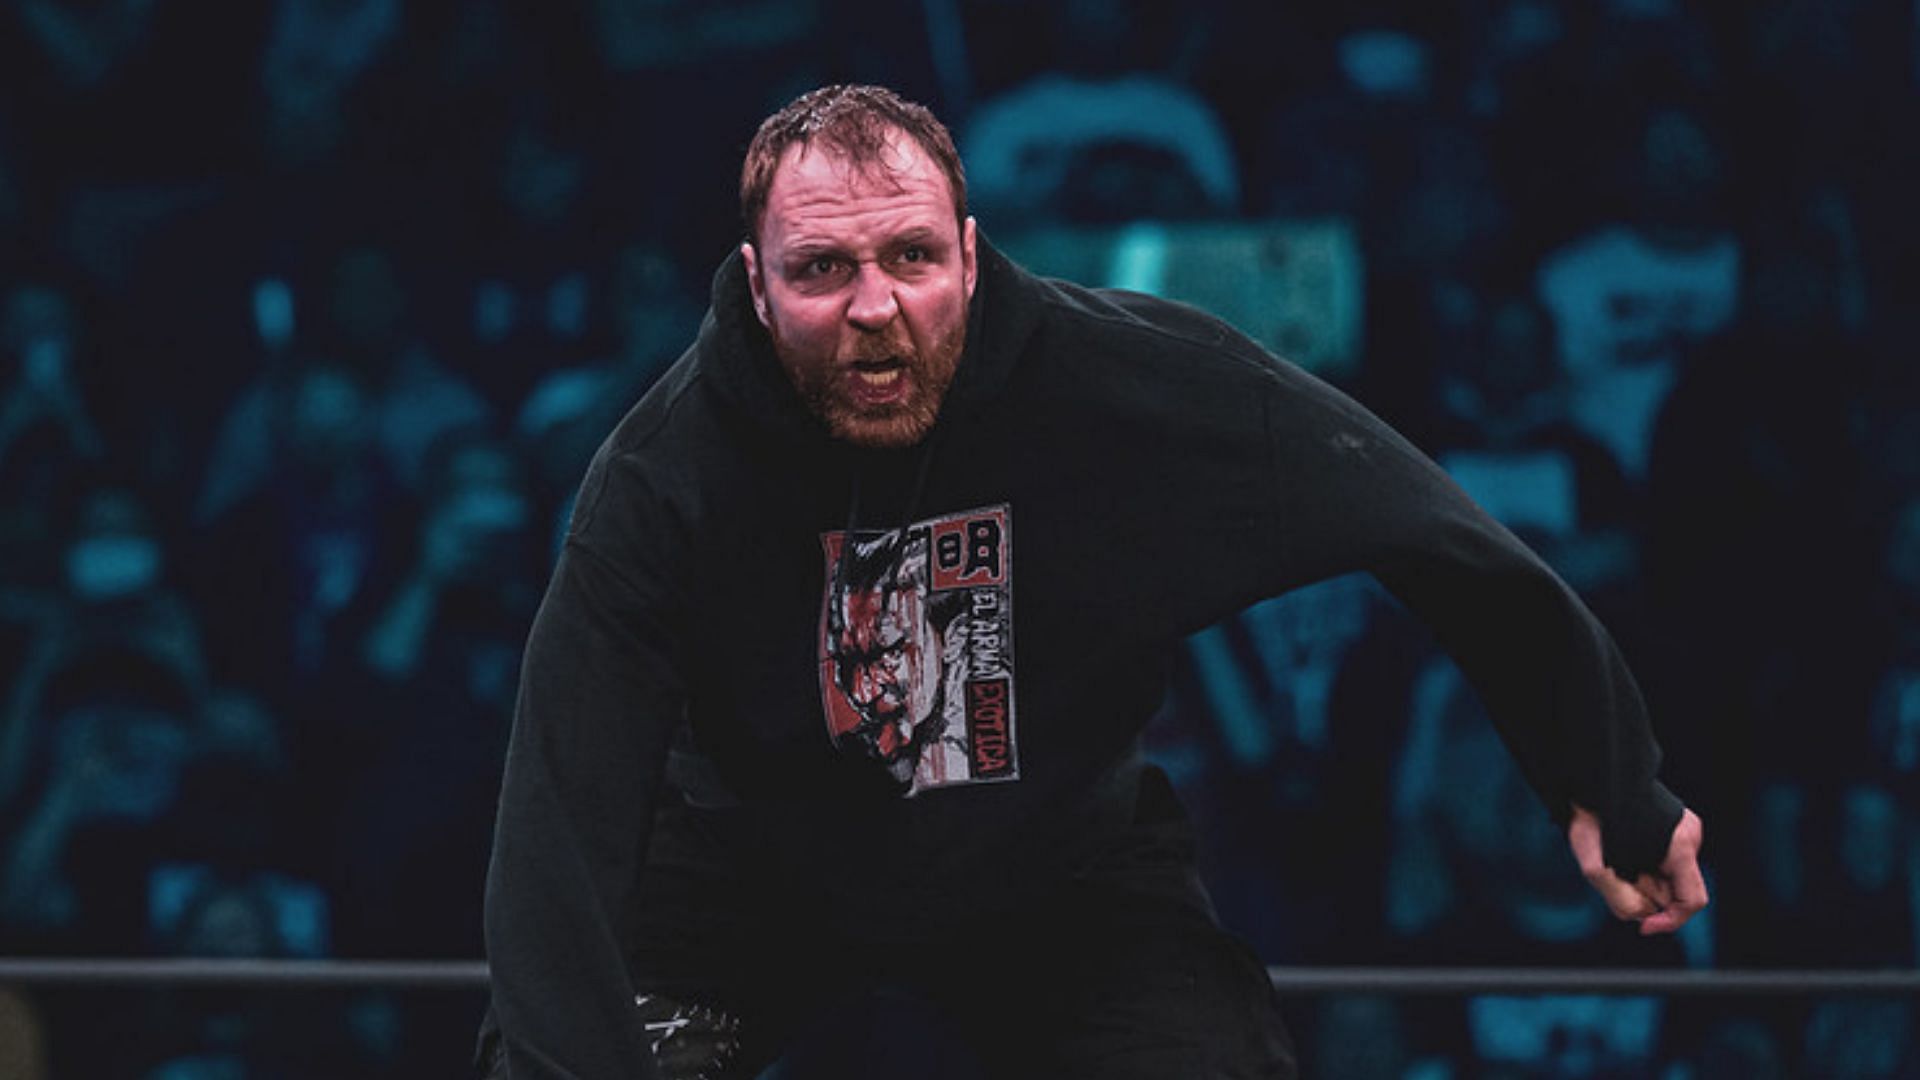 Jon Moxley during his entrance at an AEW event in 2022 (credit: Jay Lee Photography)